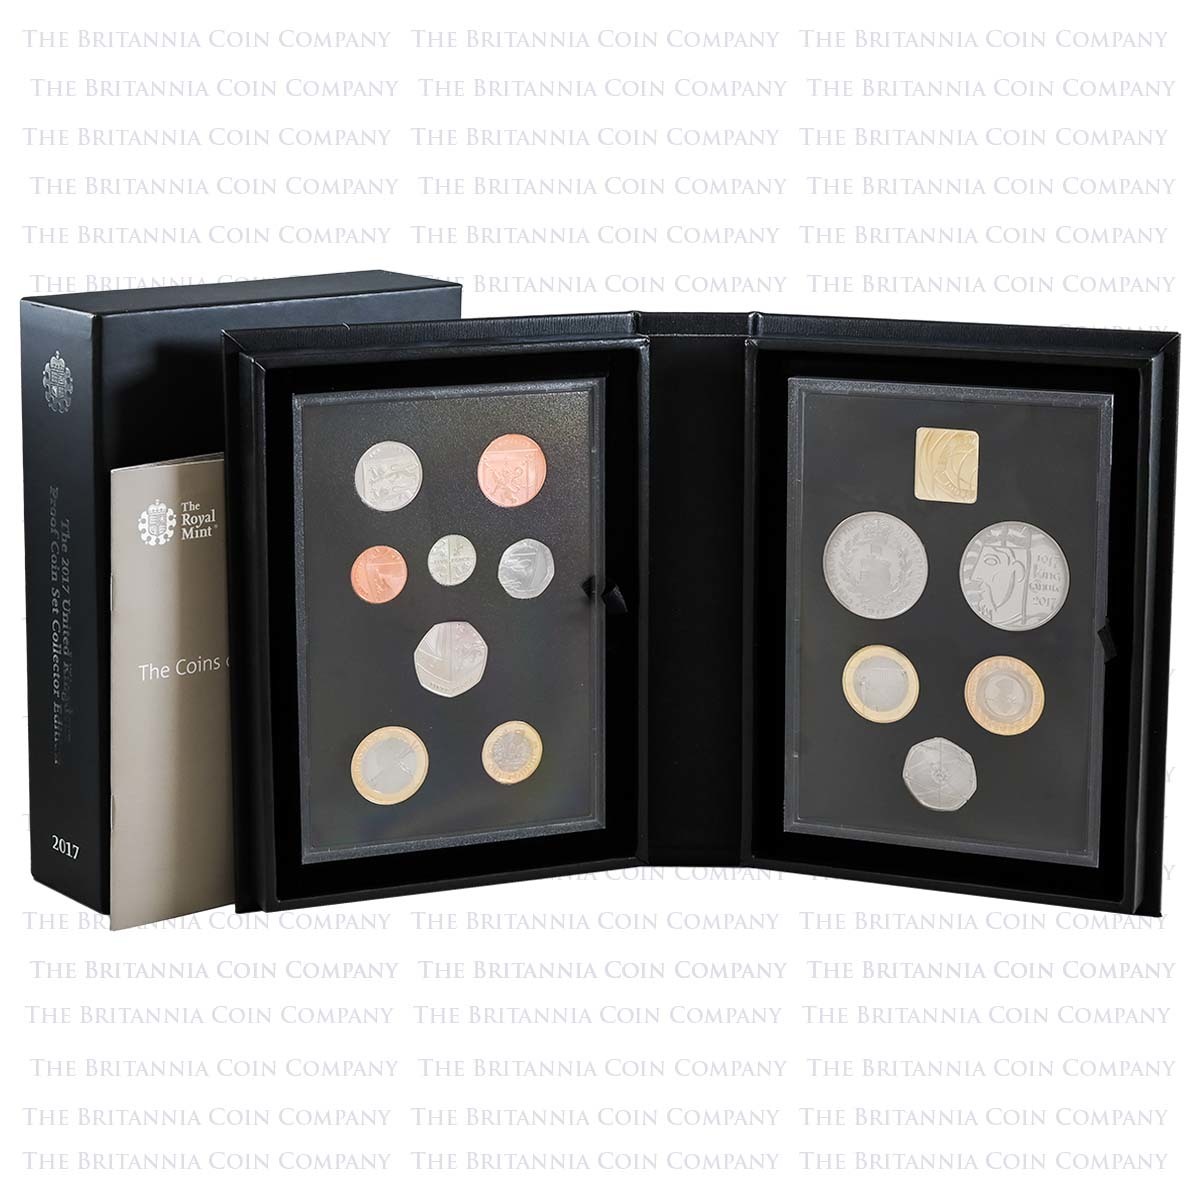 2017-proof-coin-set-collector-edtition-001-m